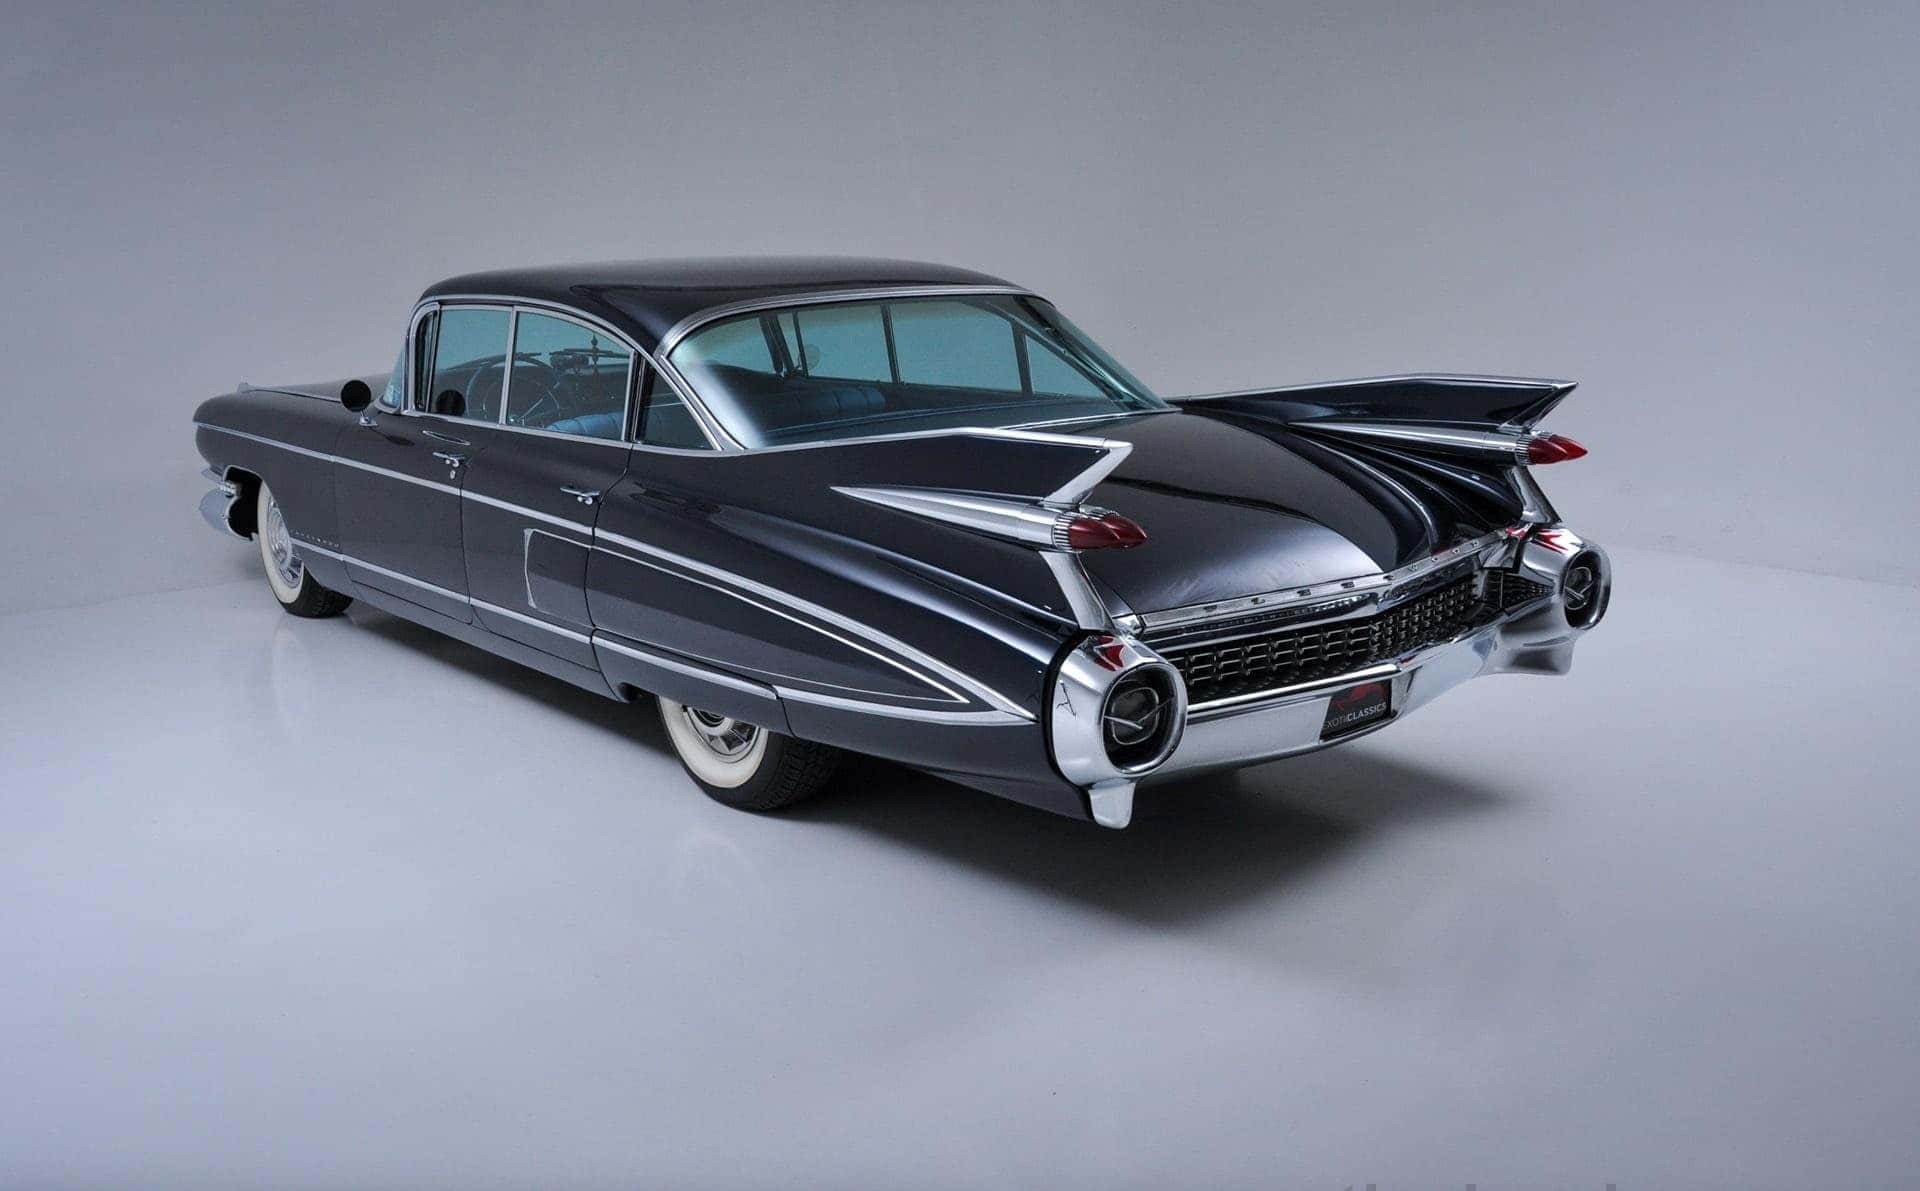 Caption: Classic Cadillac Fleetwood in all its Glory Wallpaper